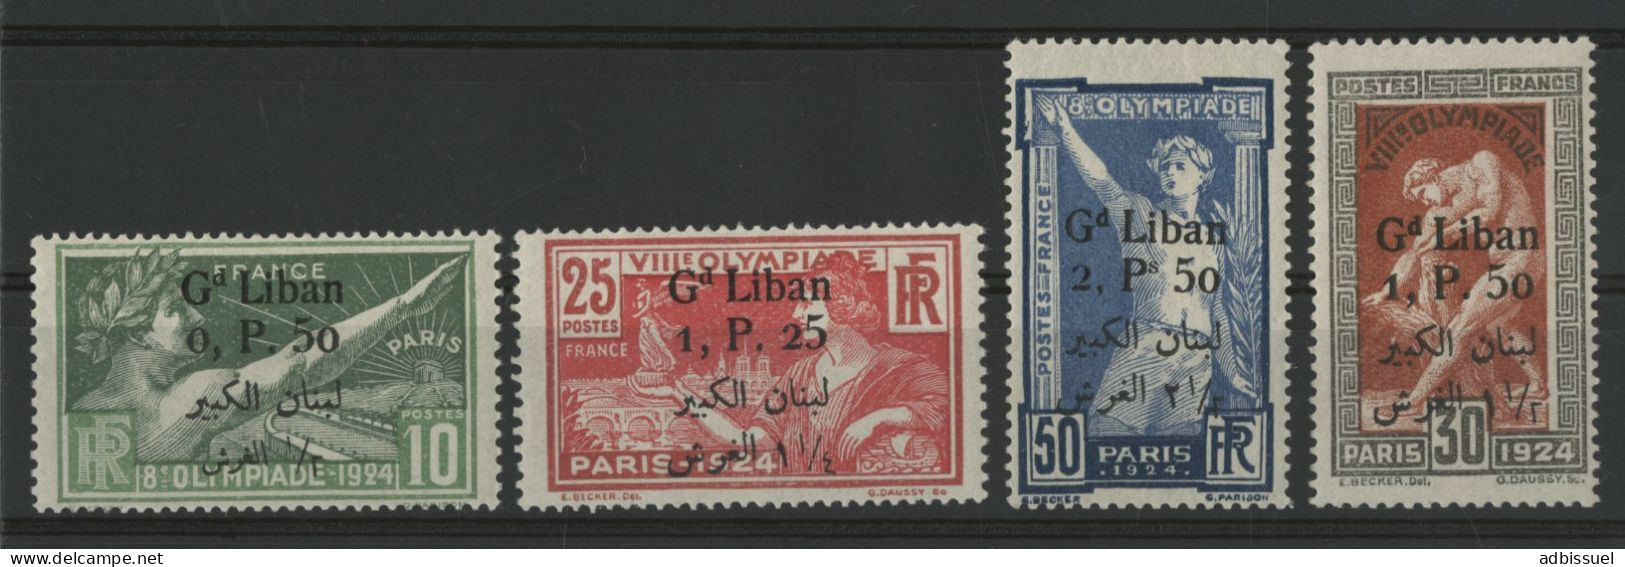 GRAND LIBAN N° 45 à 48 Cote 260 € Neufs ** (MNH) JEUX OLYMPIQUES TB - Unused Stamps